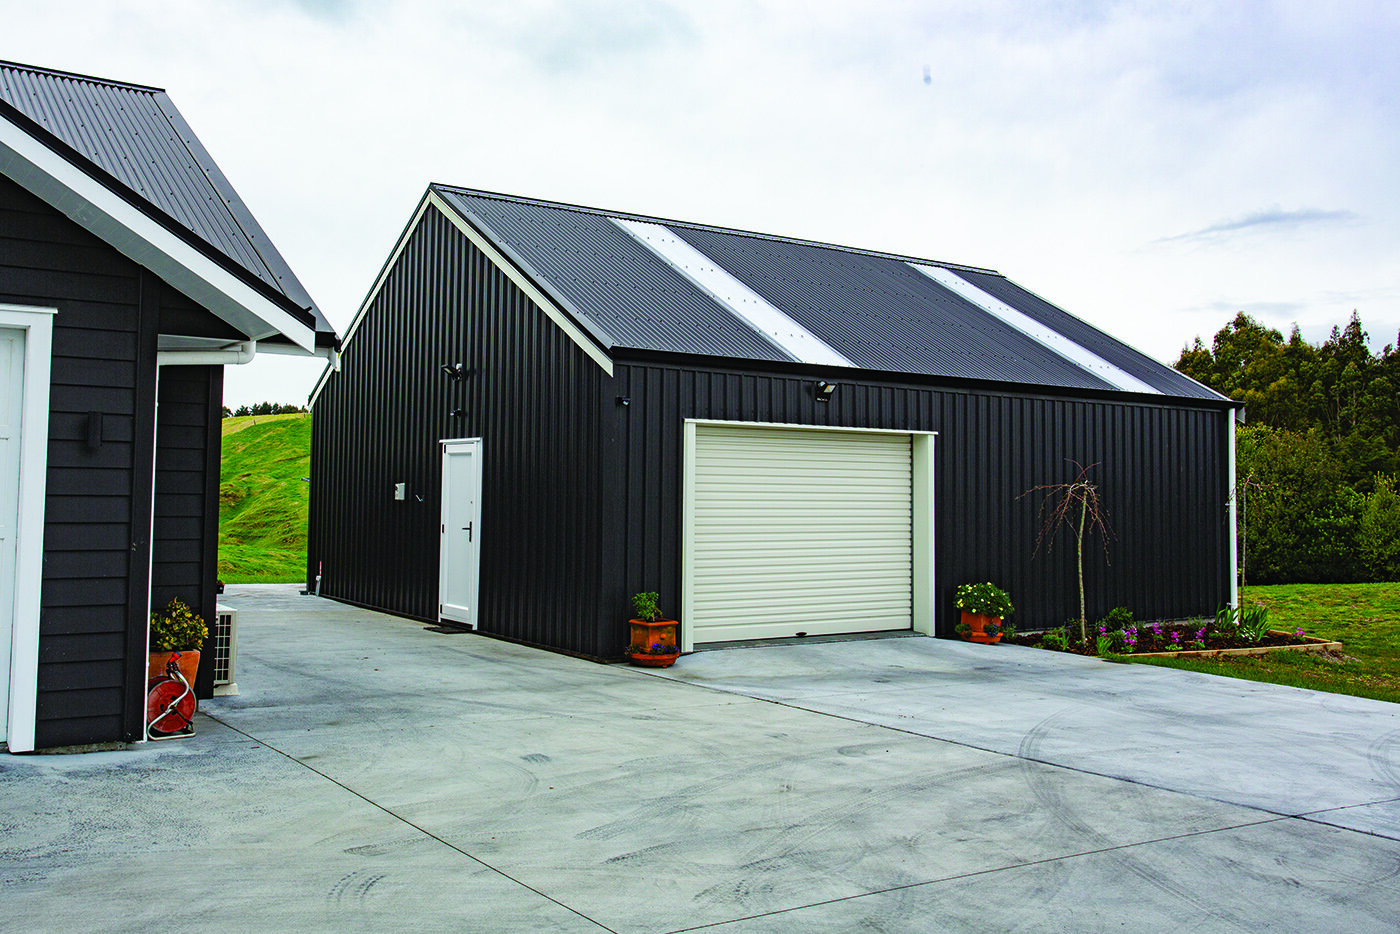 The steel shed perfectly complements the wooden home